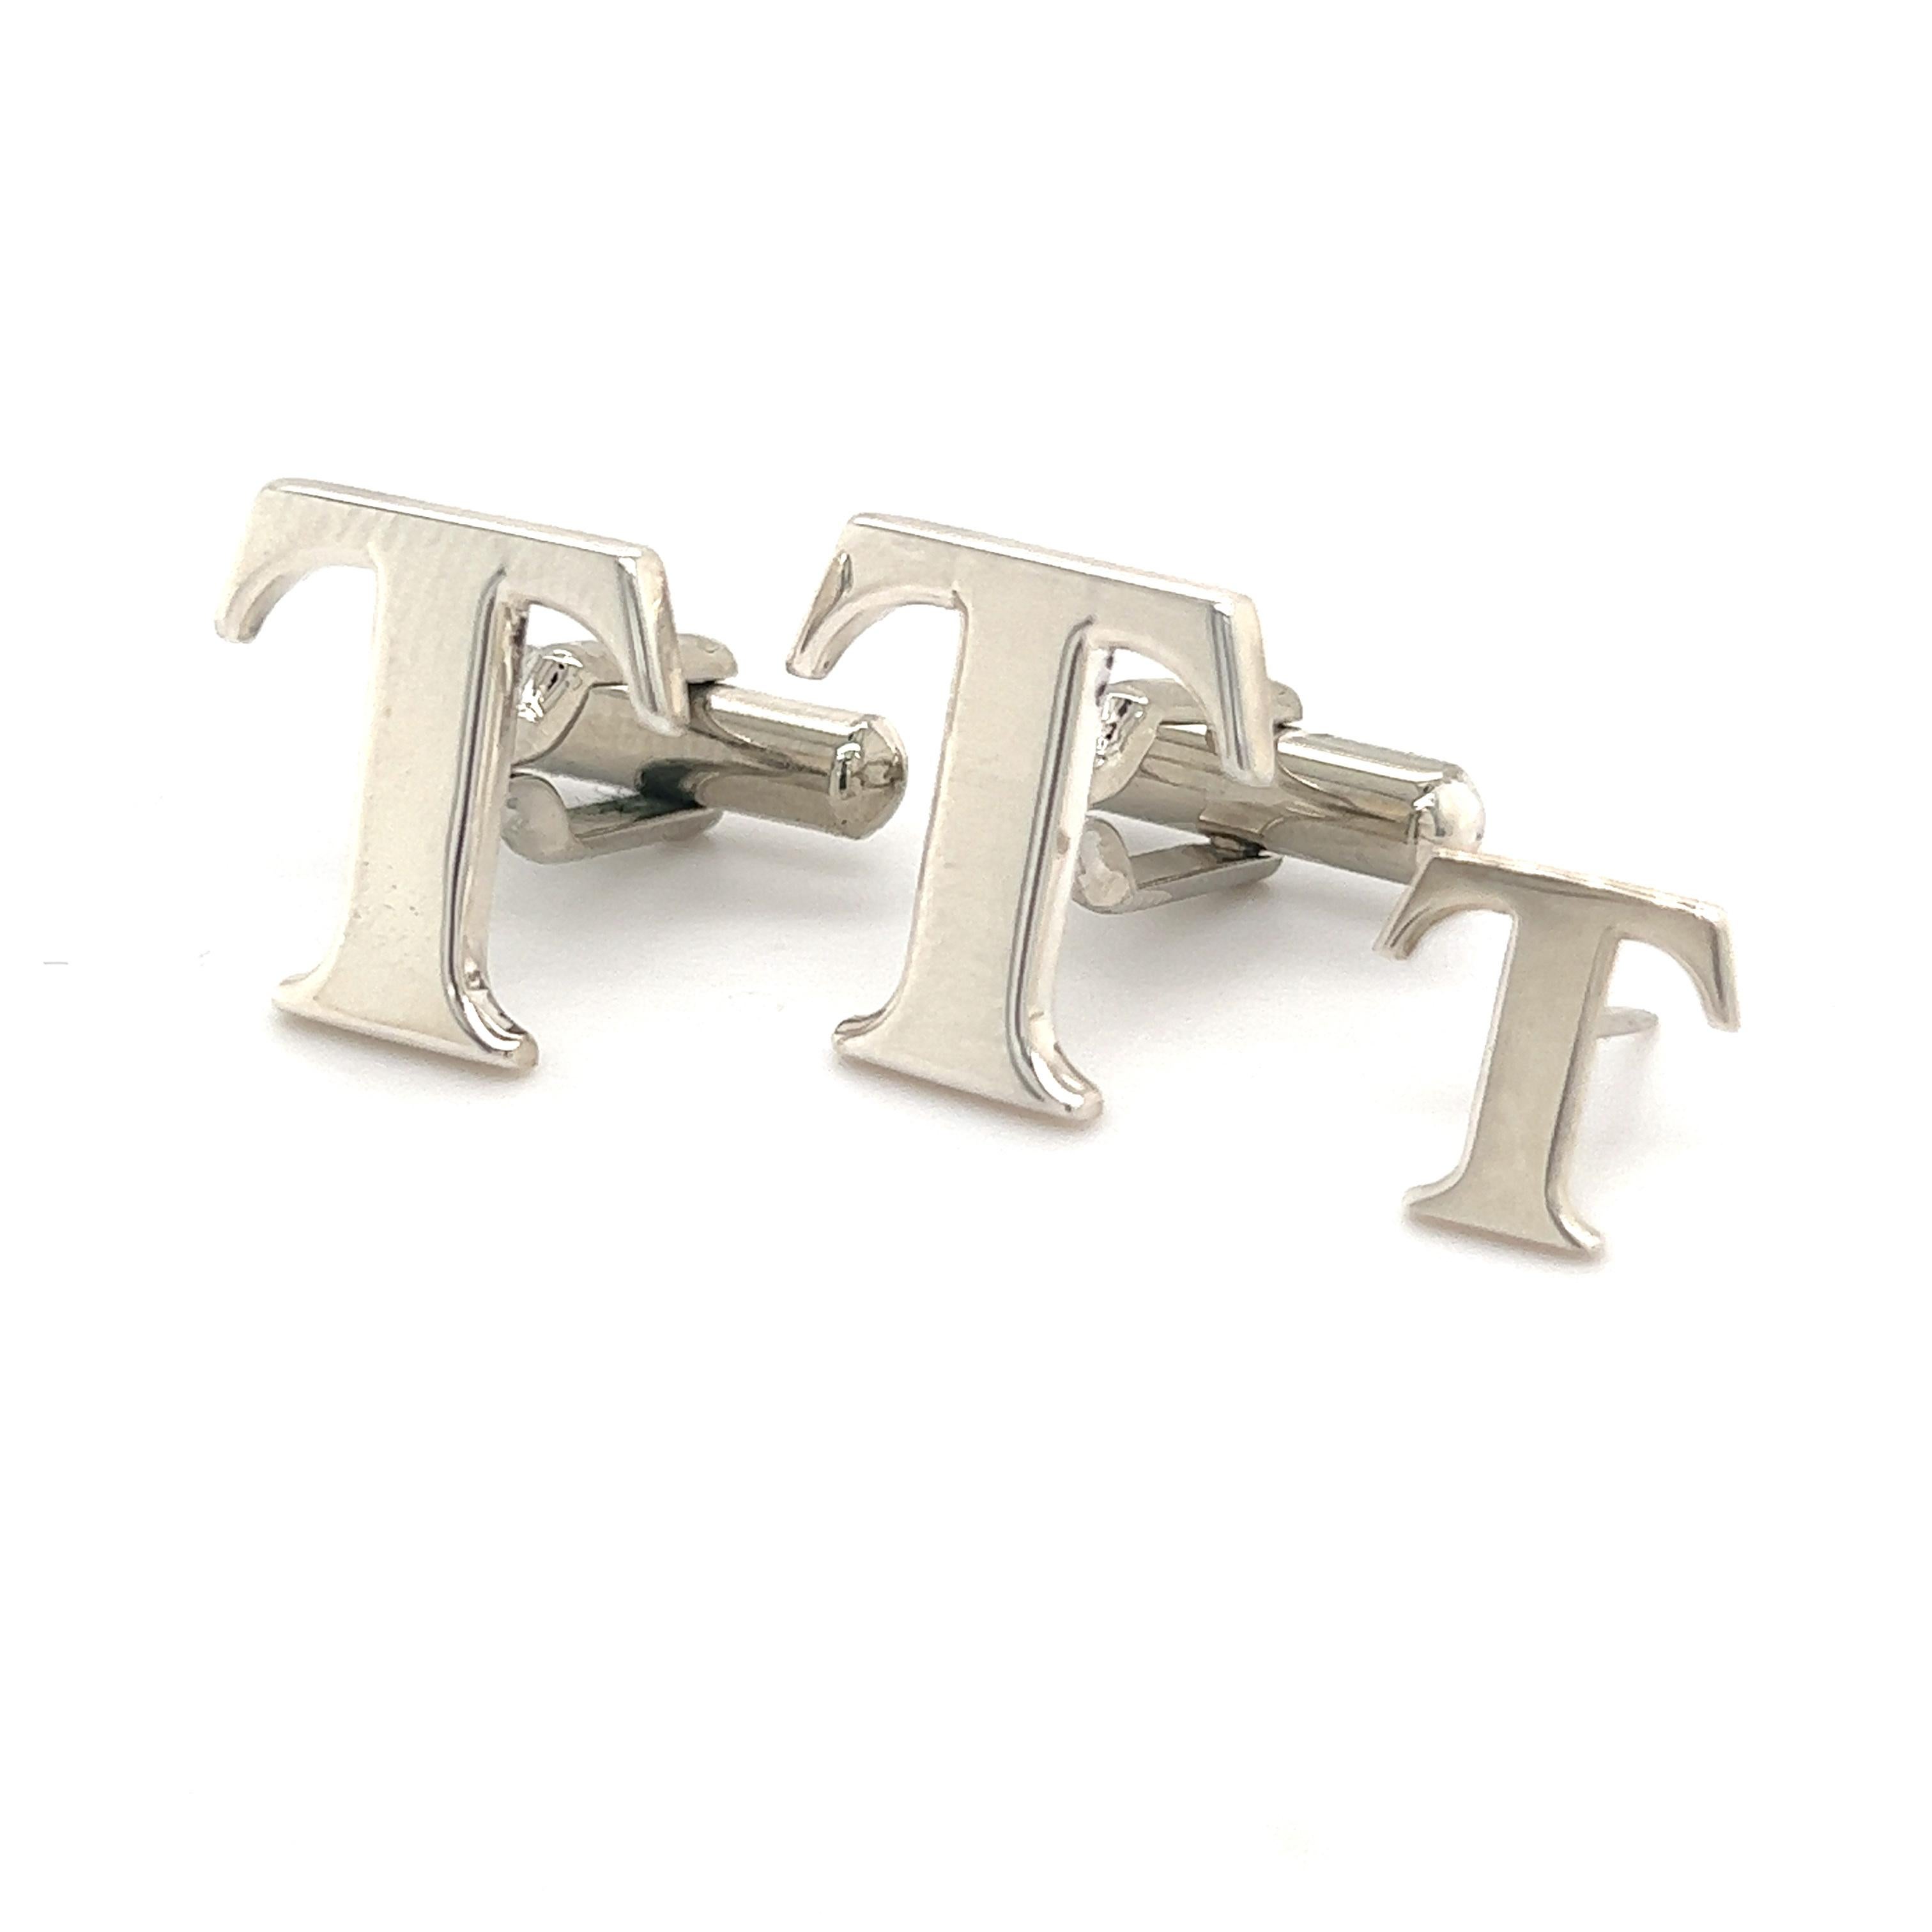 Tiffany & Co Estate T Cufflinks + Tie Pin Set Sterling Silver TIF264

TRUSTED SELLER SINCE 2002

PLEASE SEE OUR HUNDREDS OF POSITIVE FEEDBACKS FROM OUR CLIENTS!!

FREE SHIPPING

DETAILS
Metal: Sterling Silver
Weight: 7.55 Grams

These Authentic